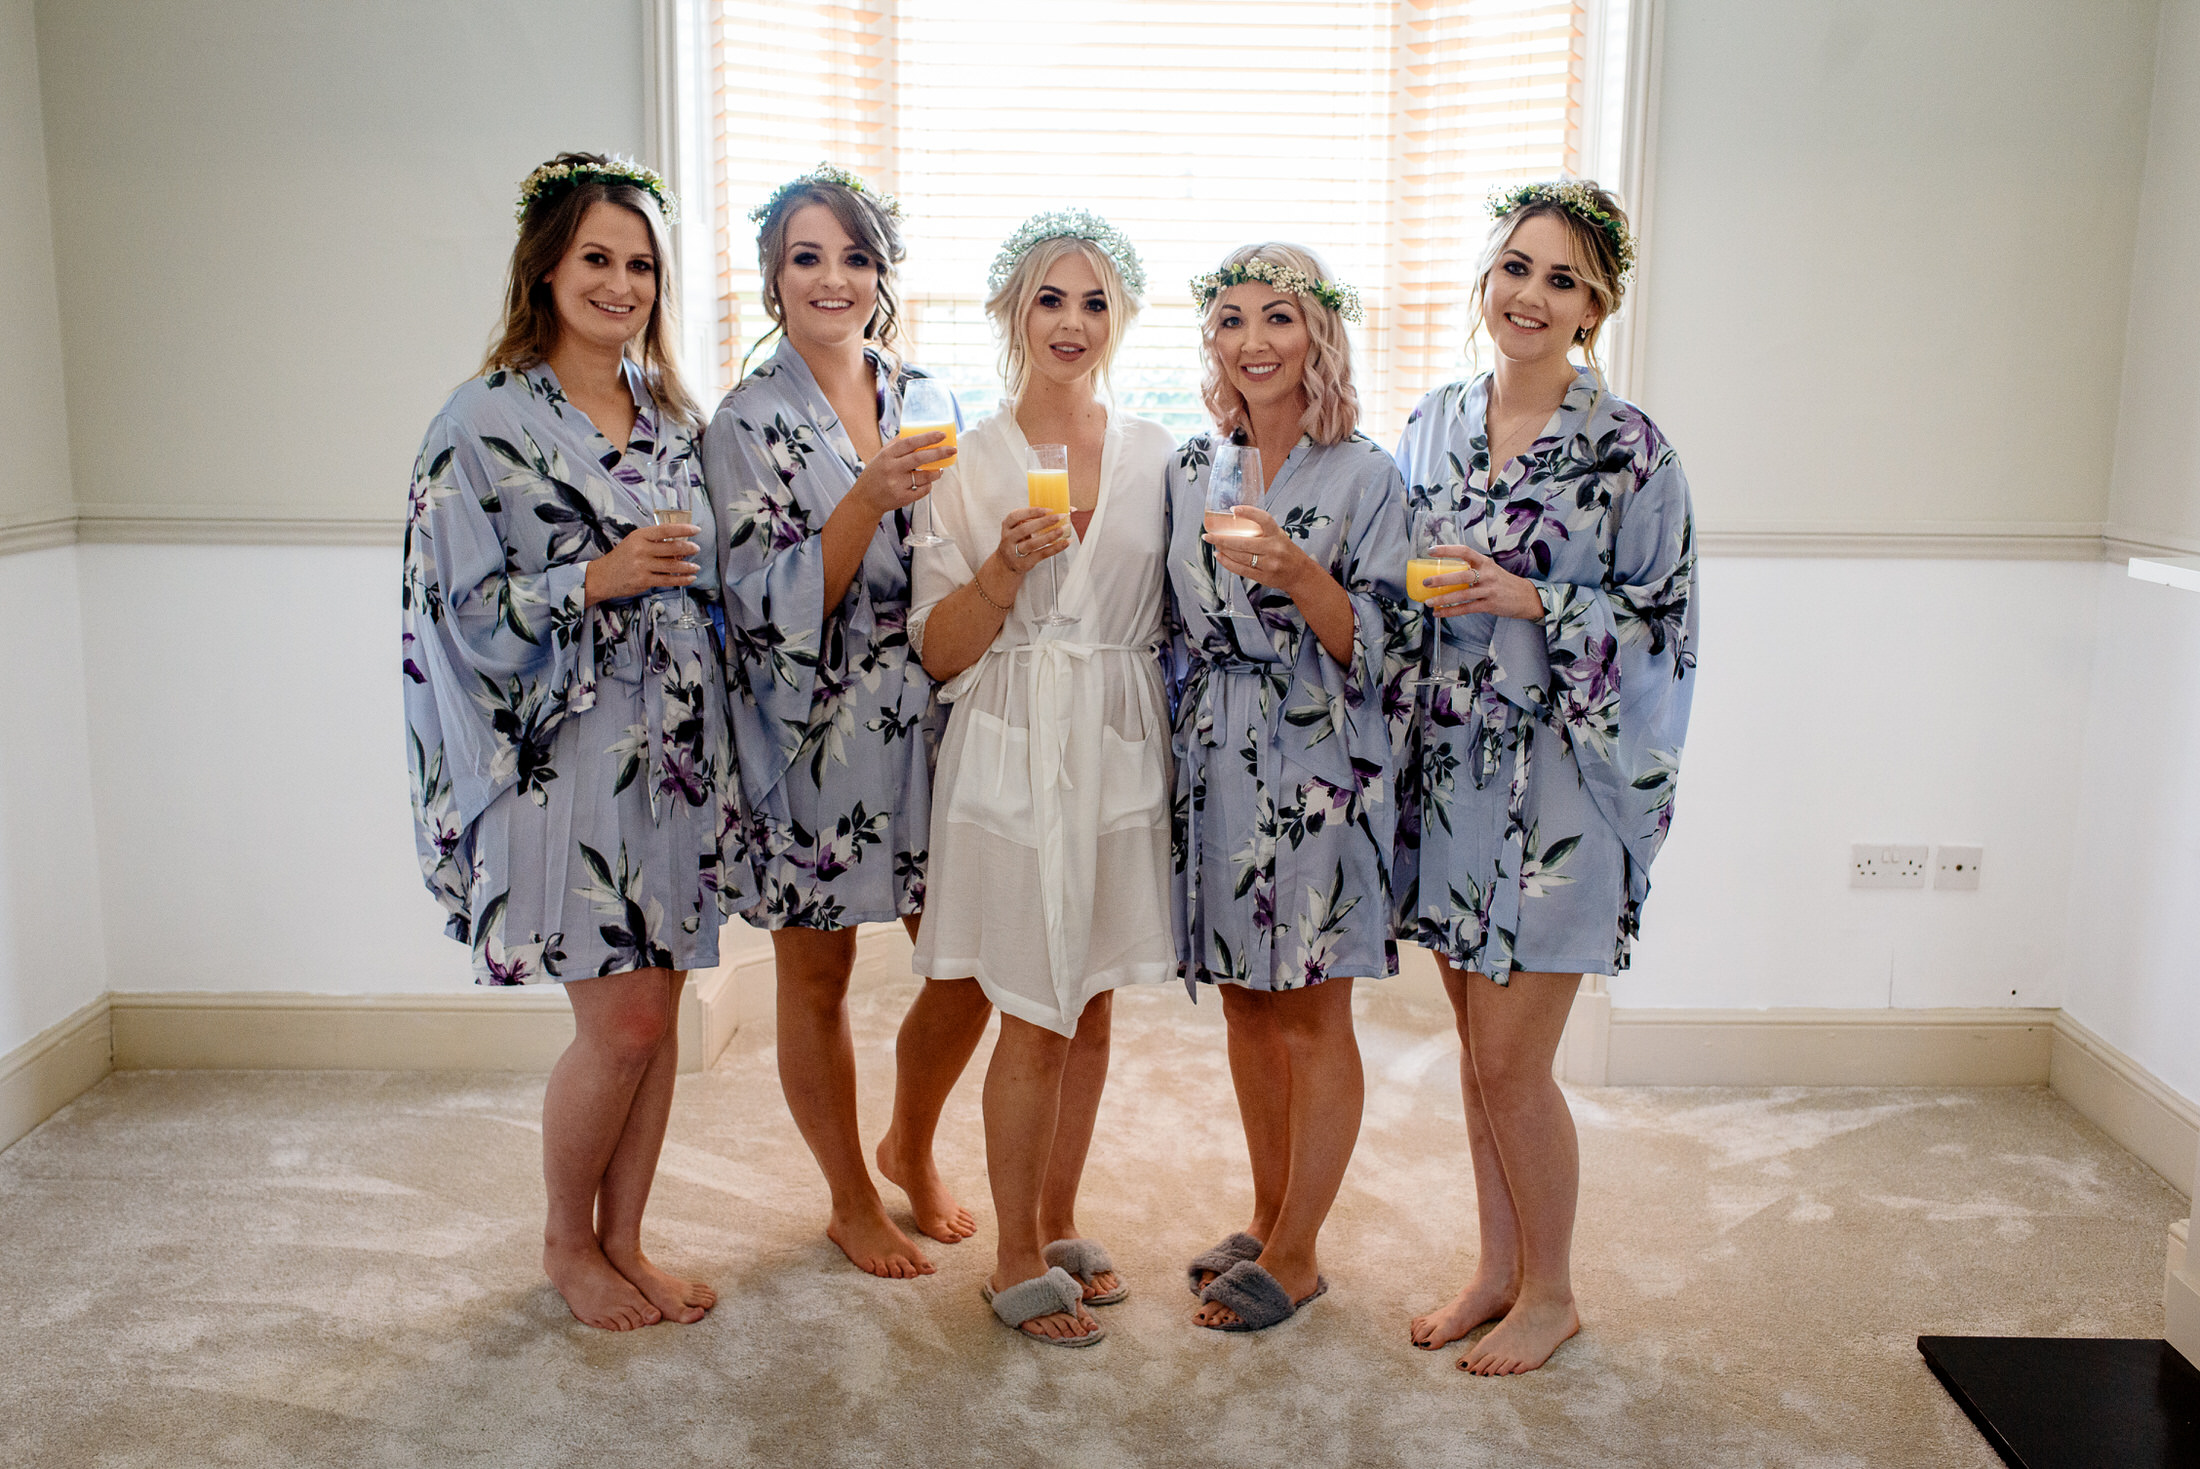 A group of bridesmaids in floral robes posing for a wedding photo.